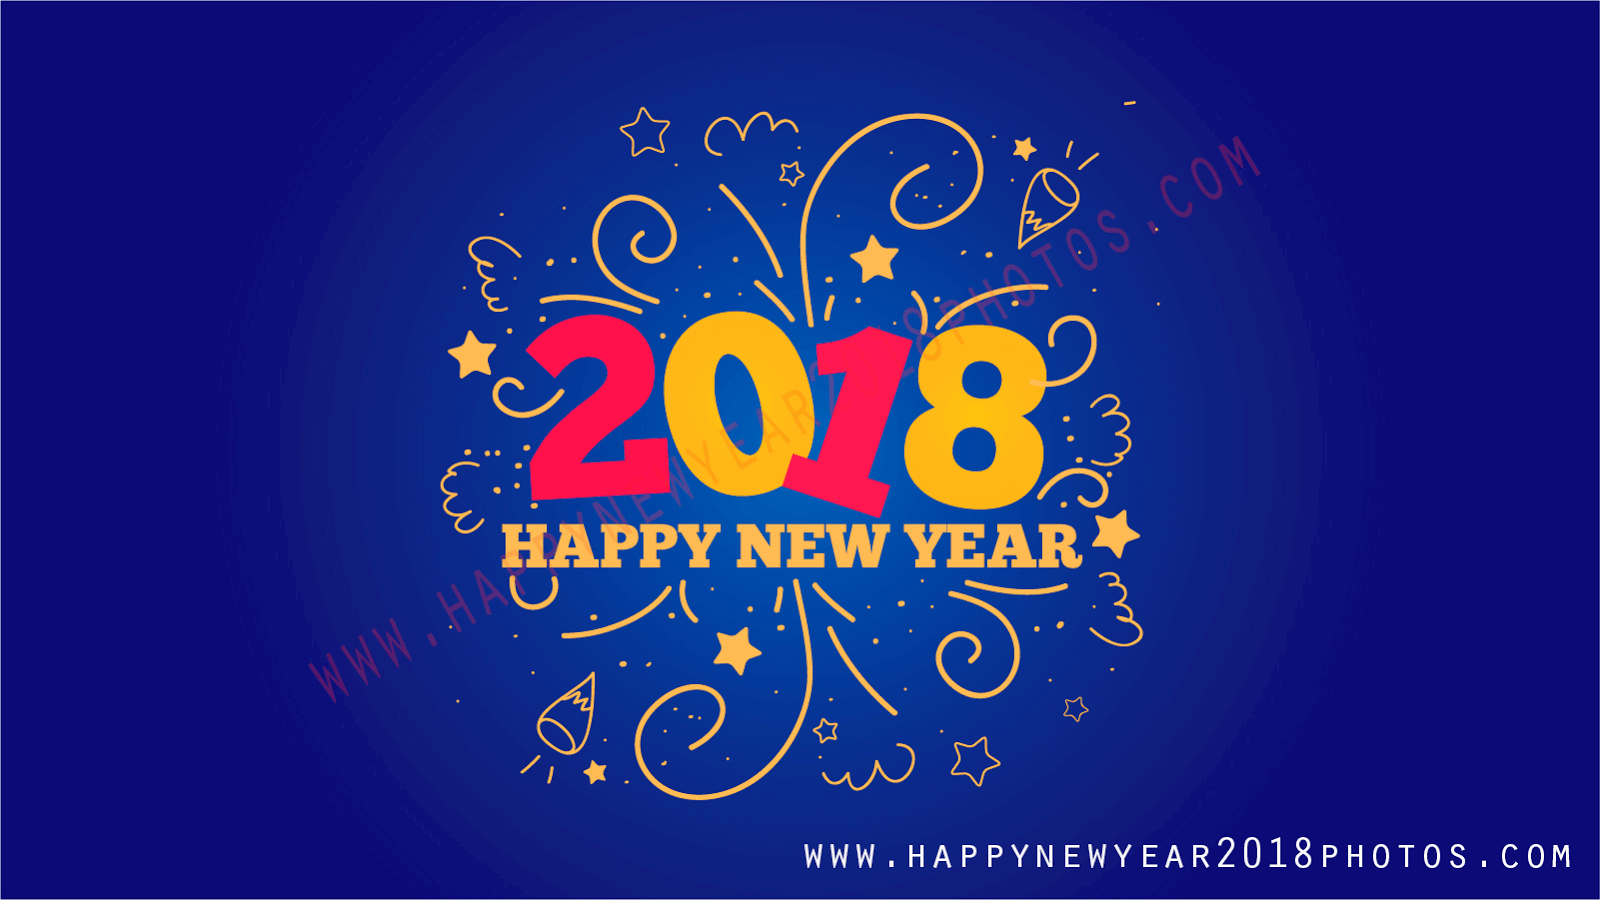 Happy New Year 2018 Wallpaper, Wishes, Greetings, Status